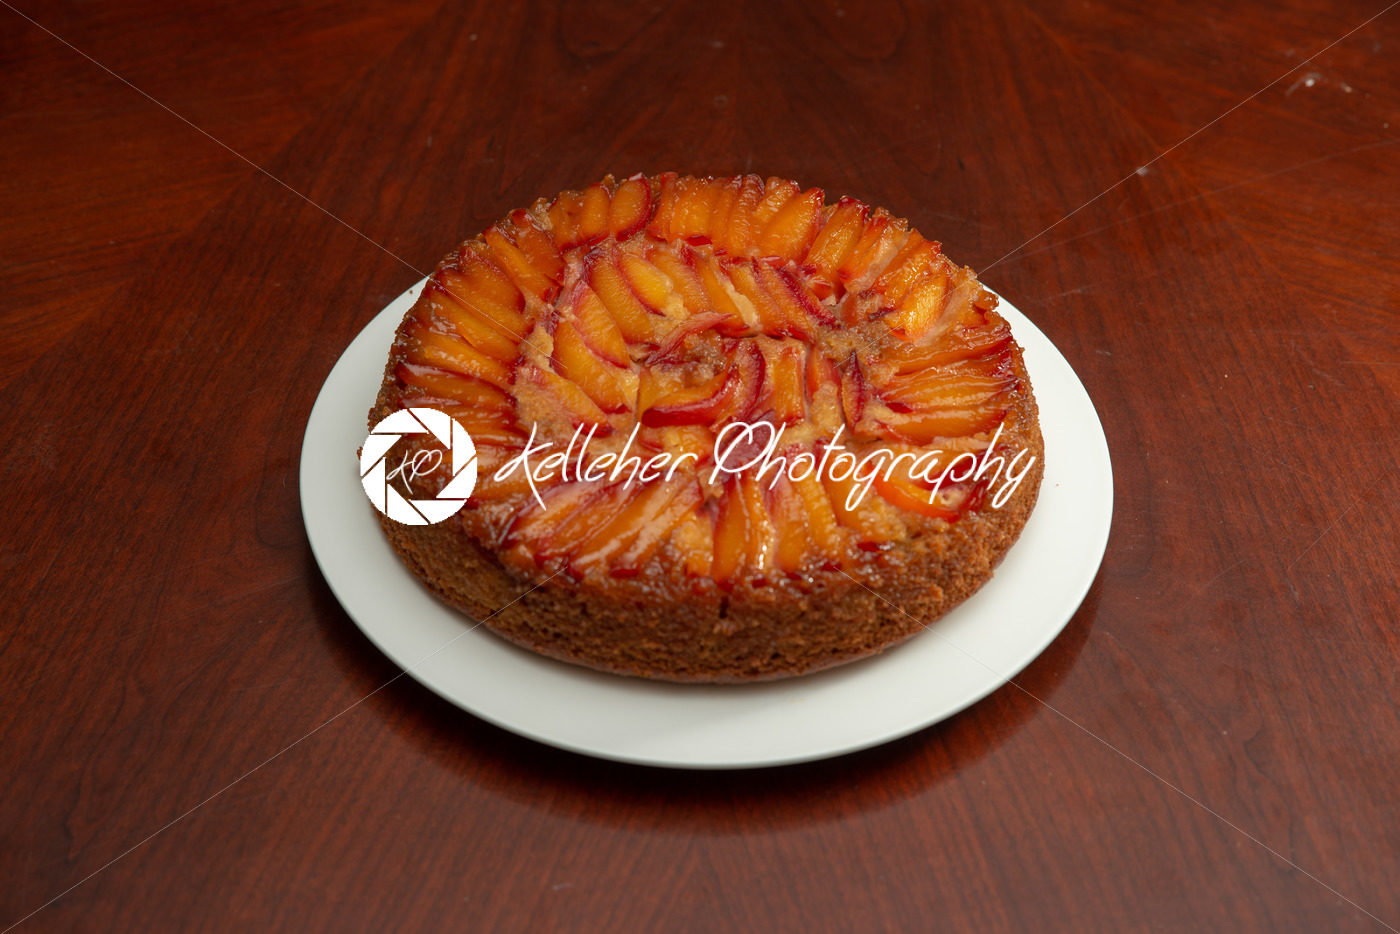 Cake with nectarines on white plate on top of dining table - Kelleher Photography Store